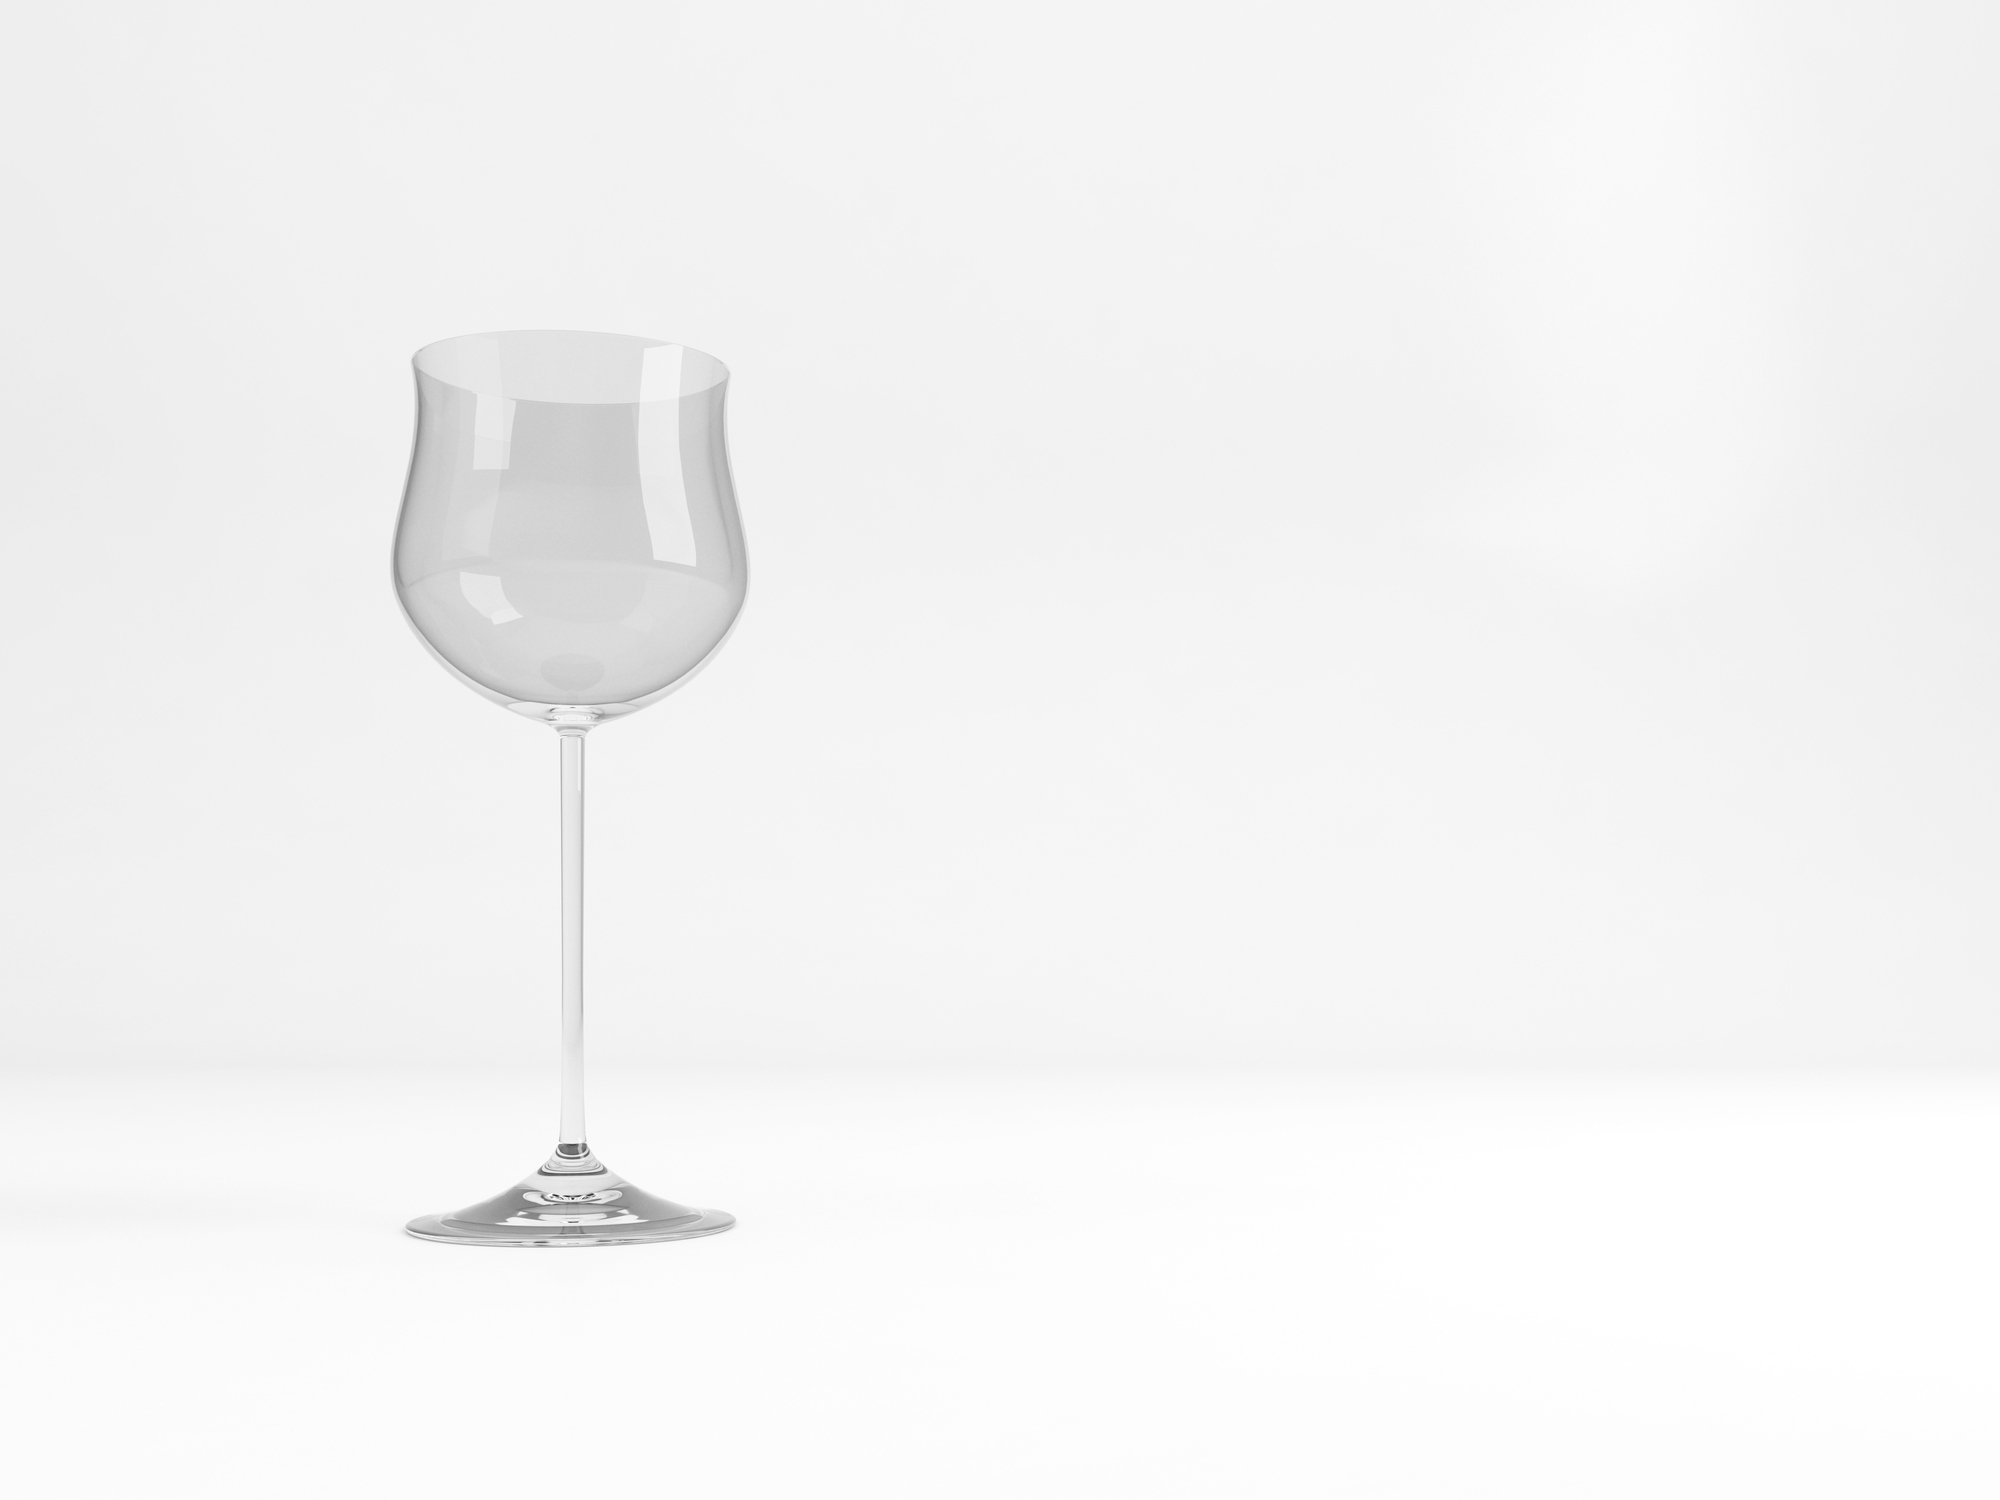 A hock wine glass on a transparent surface